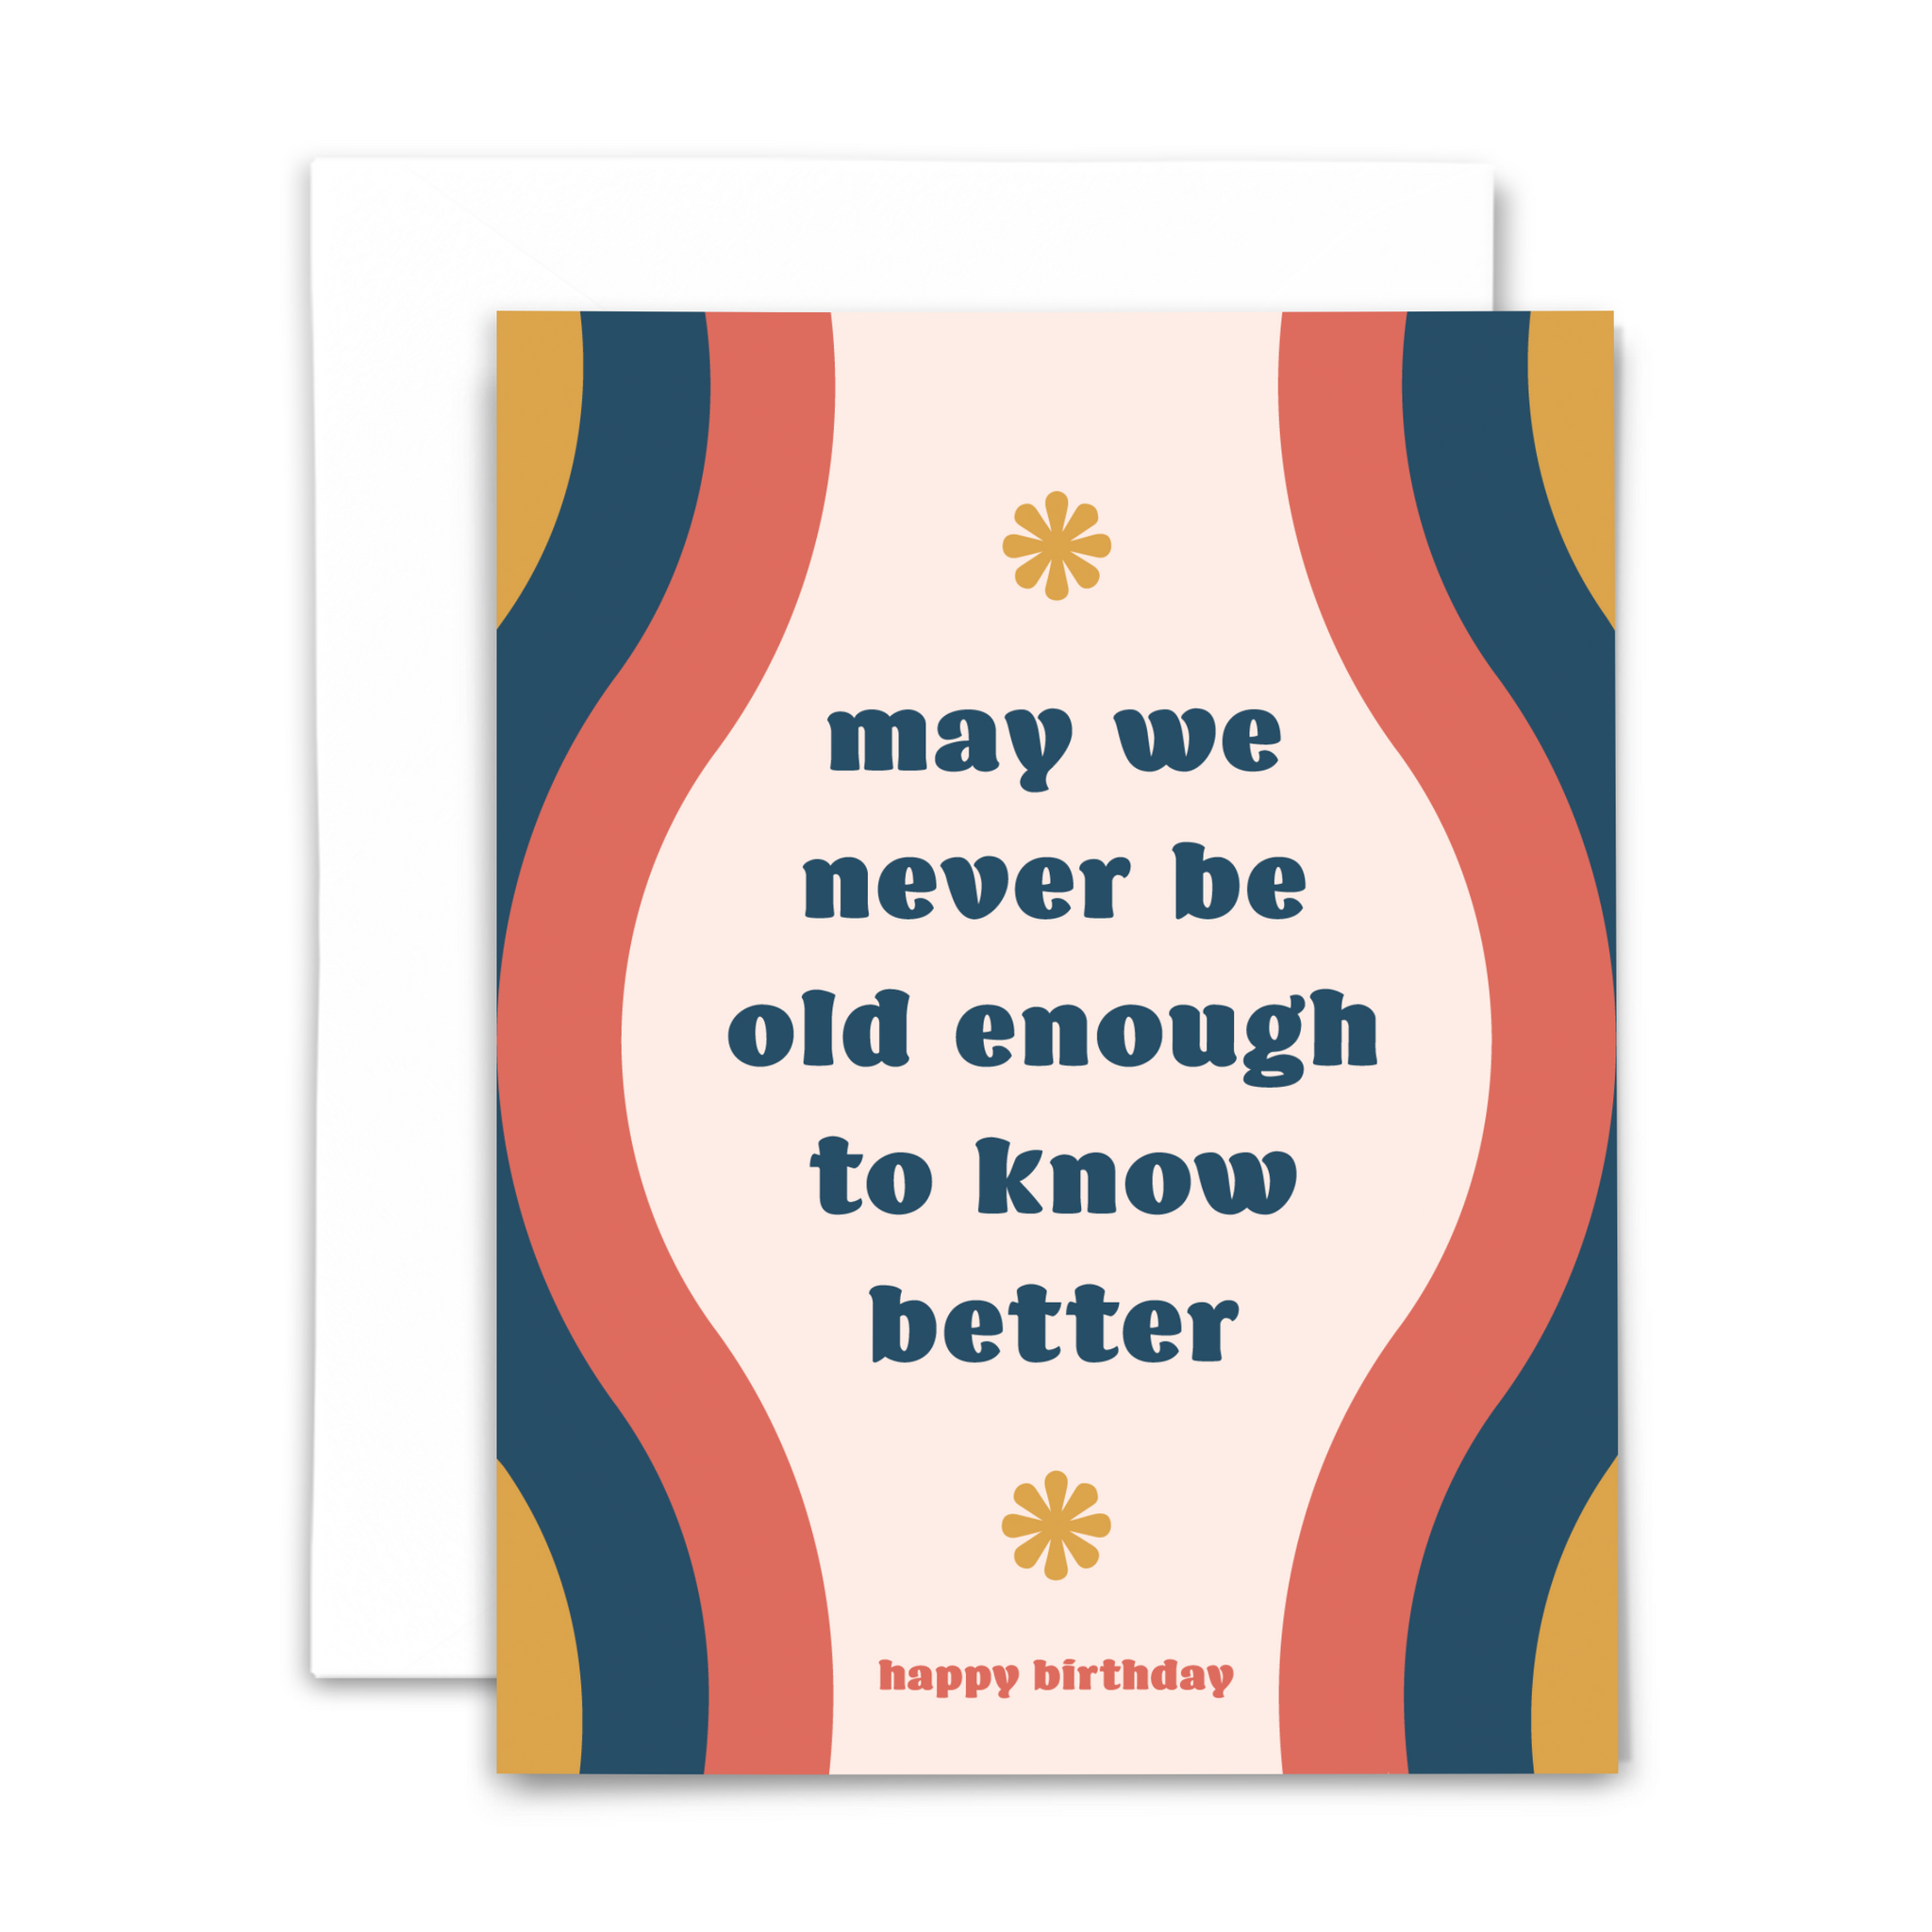 Birthday blank greeting card "may we never be old enough to know better ~ happy birthday" mid century navy font blush background with coral navy and gold vertical wavy stripes; with white envelope